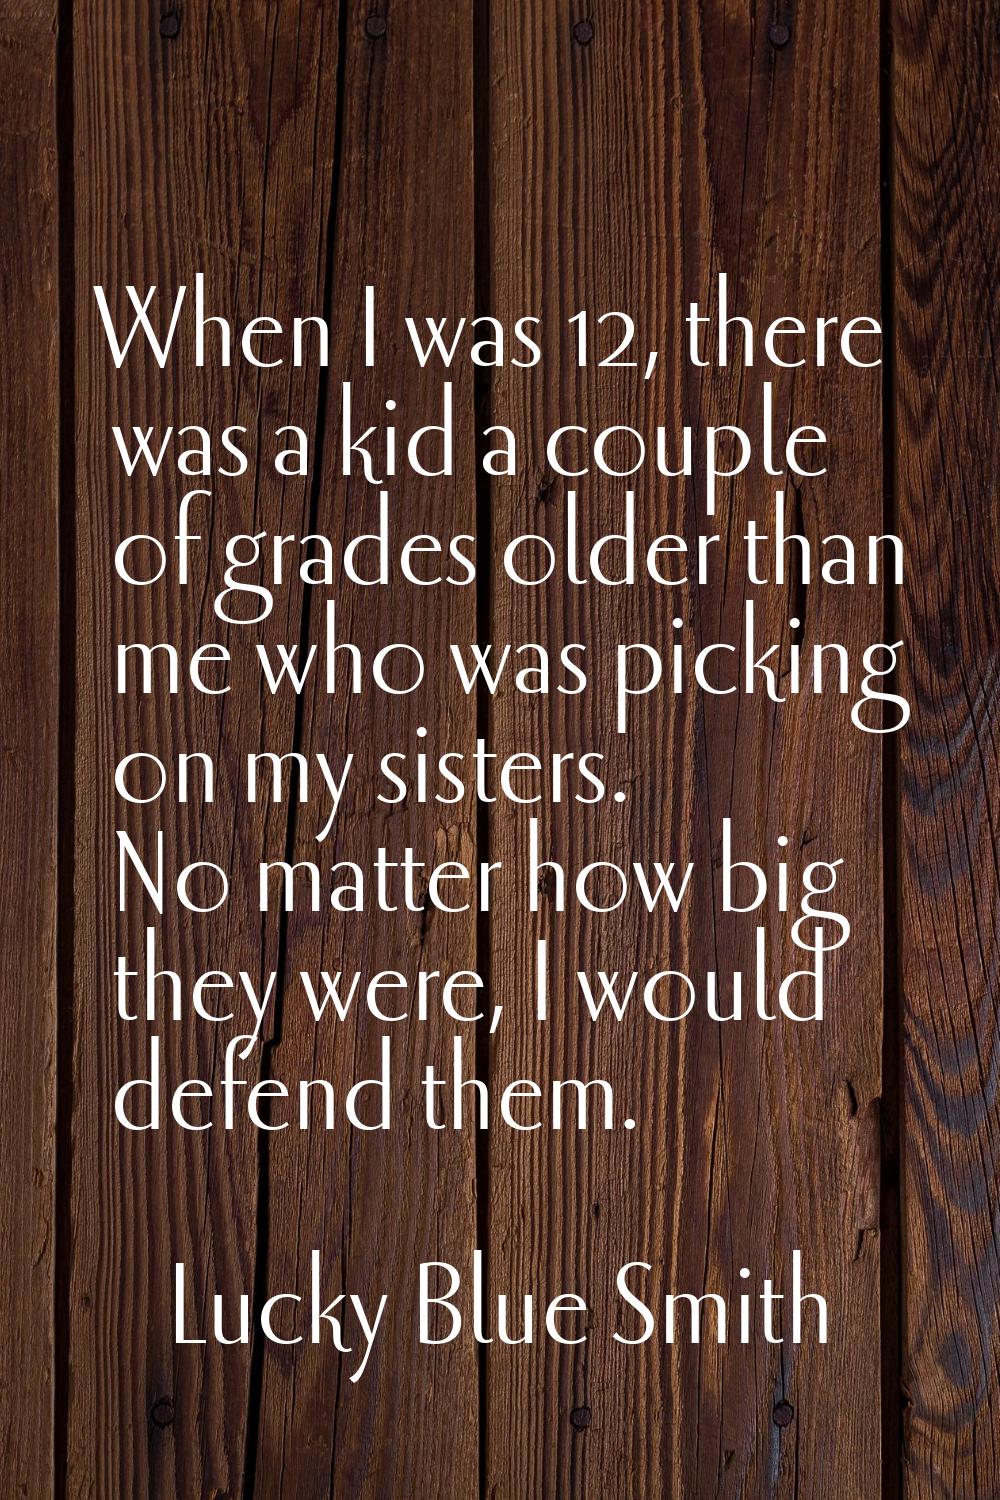 When I was 12, there was a kid a couple of grades older than me who was picking on my sisters. No m